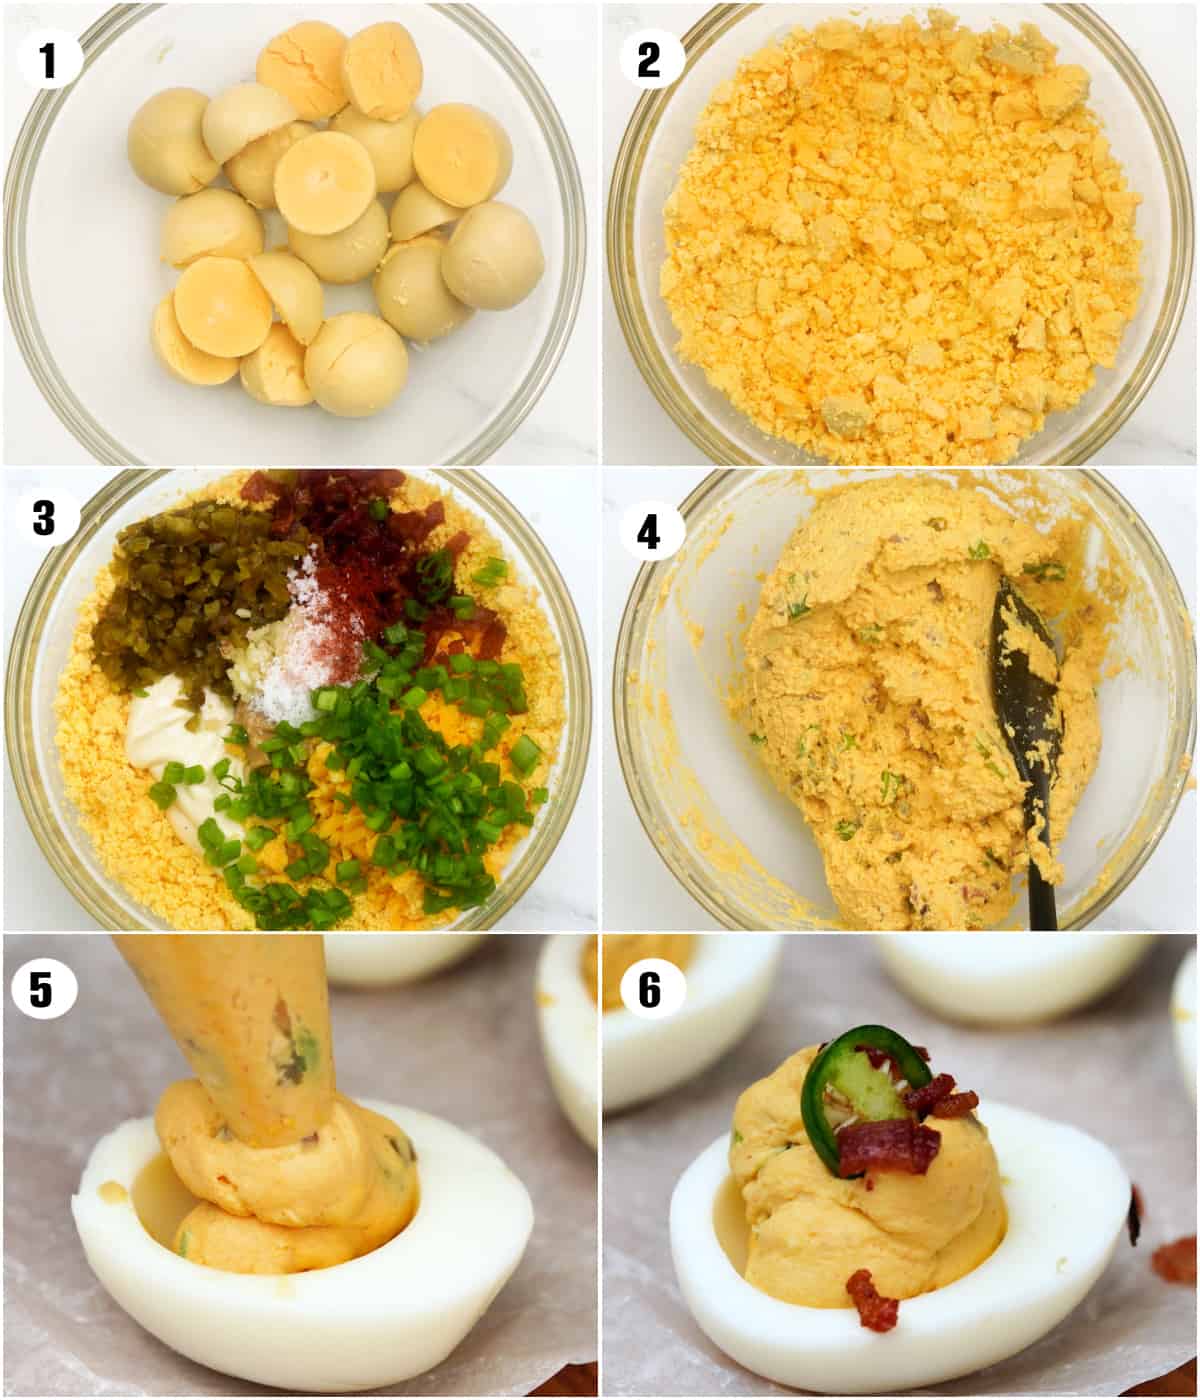 Collage of six images shows steps on how to remove yolk from boiled eggs, prepare the stuffing, fill into empty egg halves and garnish with bacon